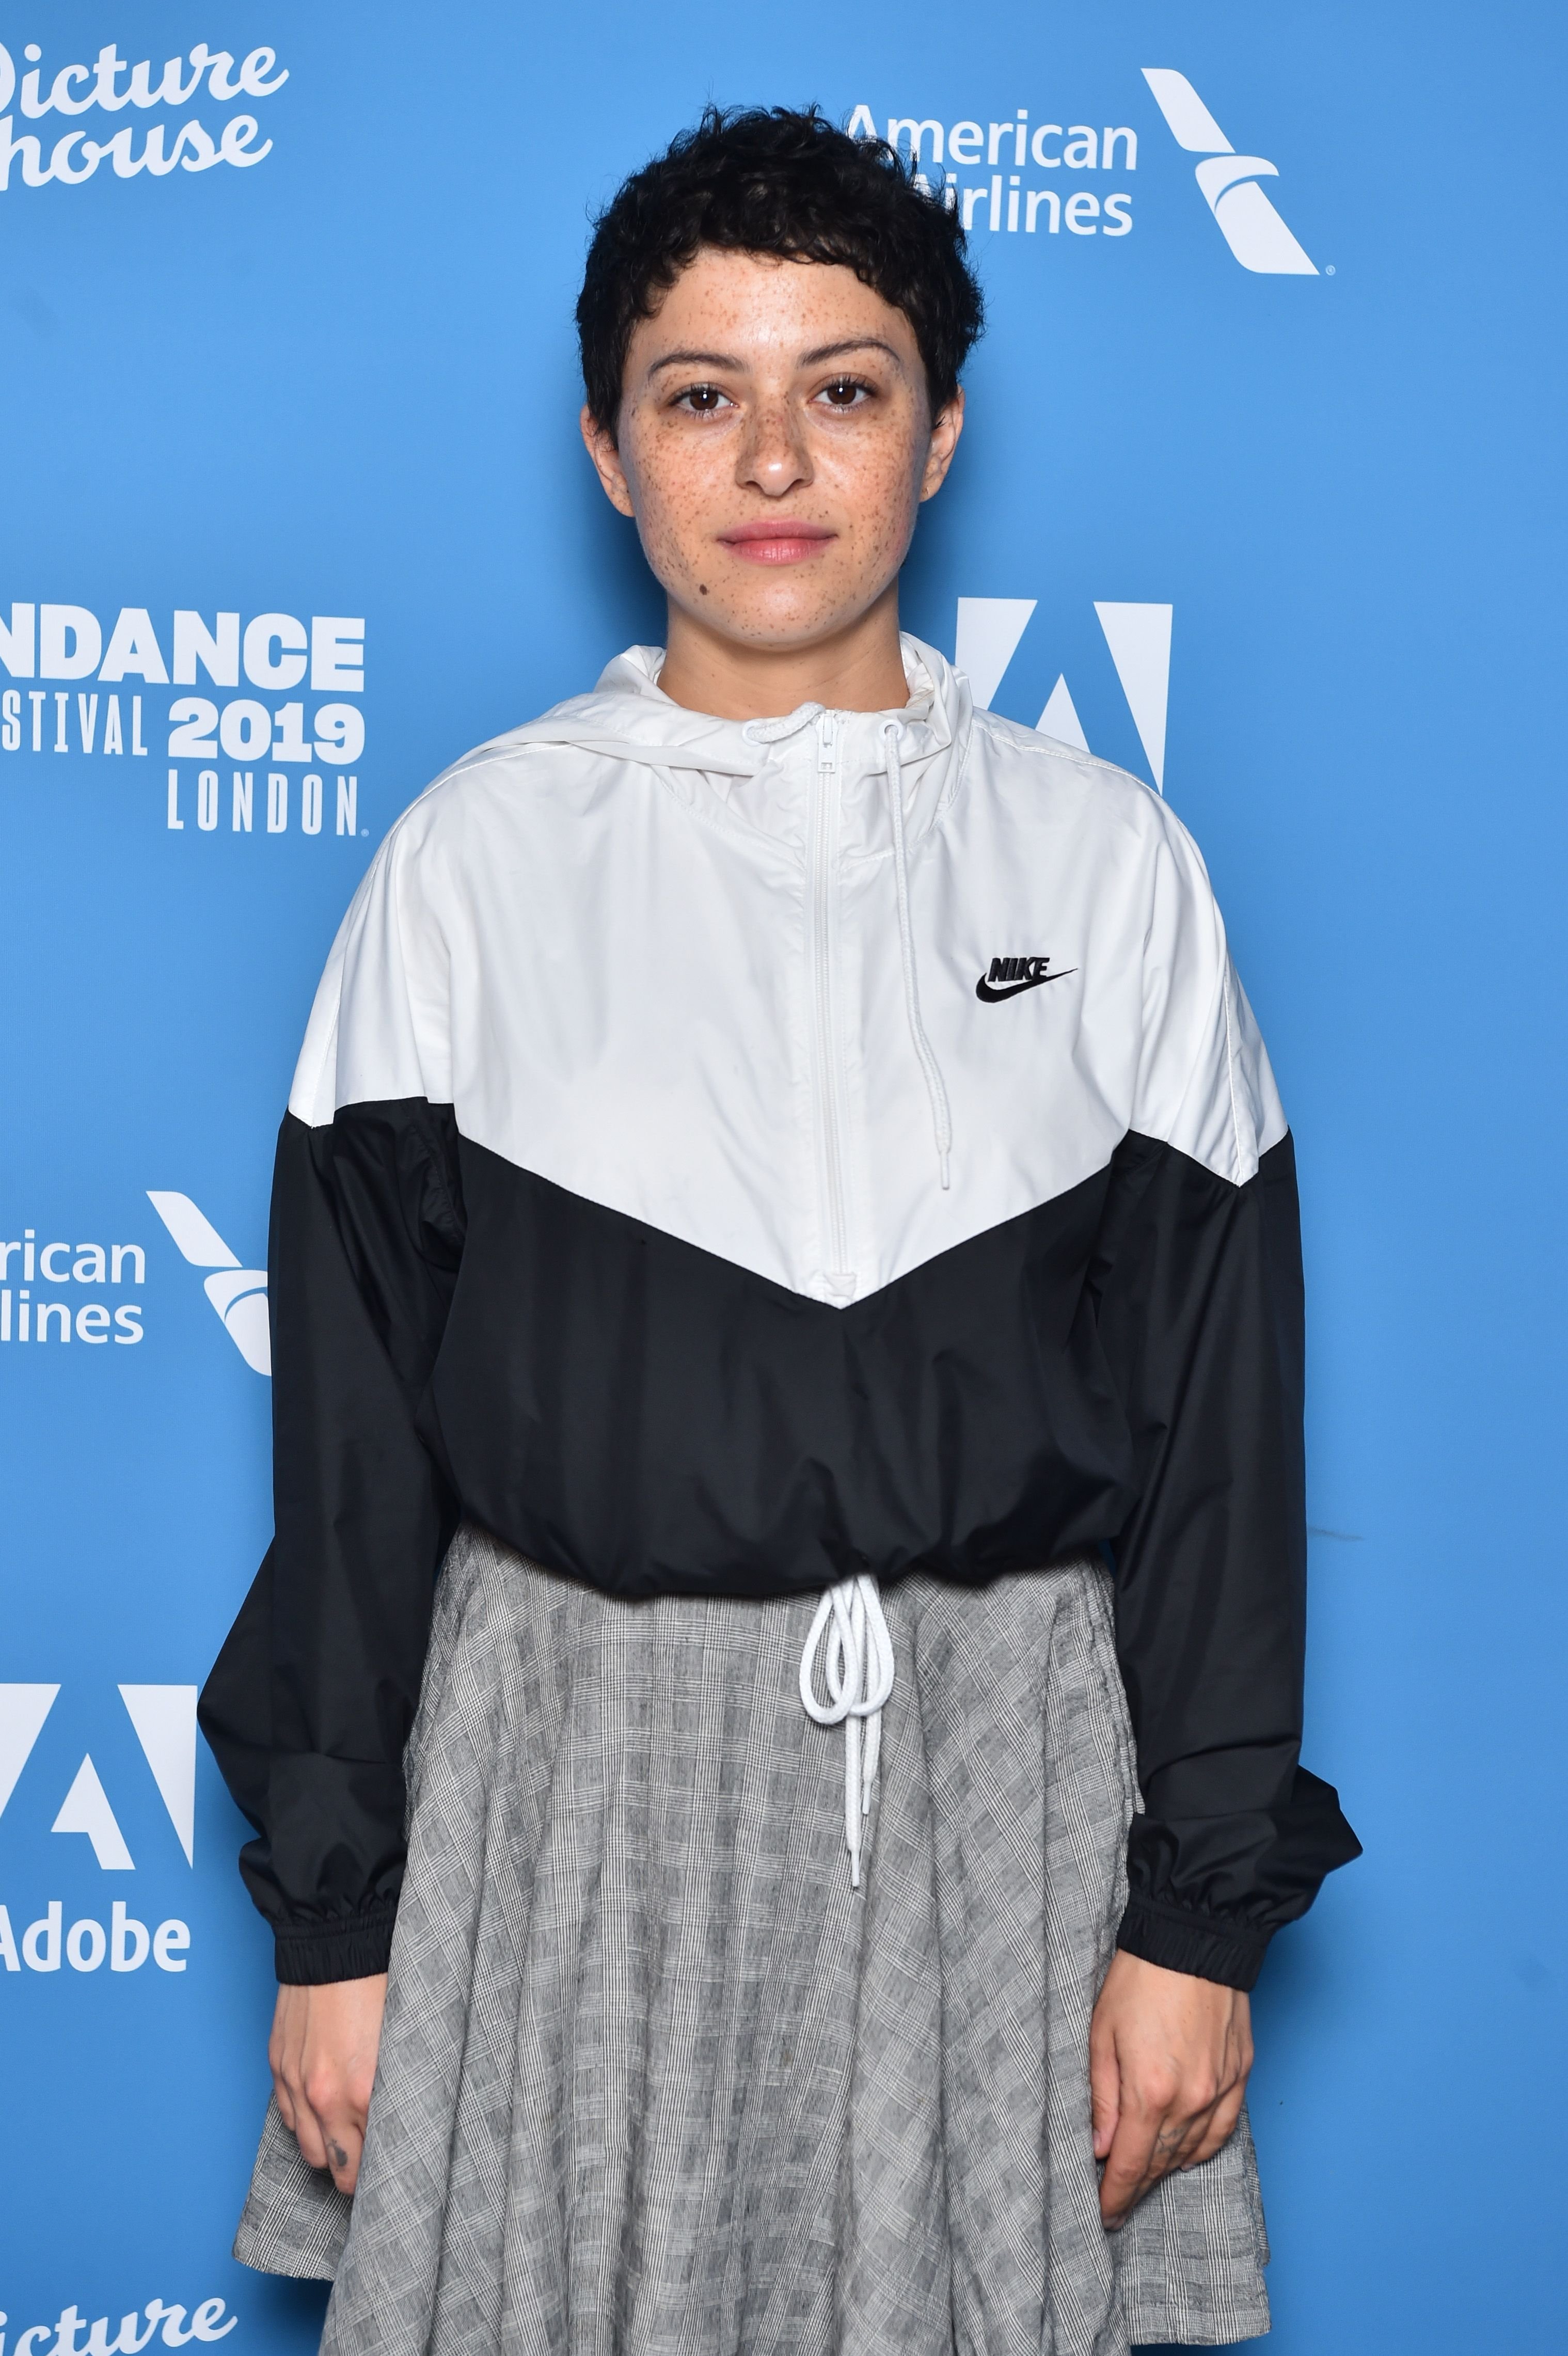 Alia Shawkat during the Sundance London Filmmaker Breakfast, at the Picturehouse Central cinema, London. | Source: Getty Images